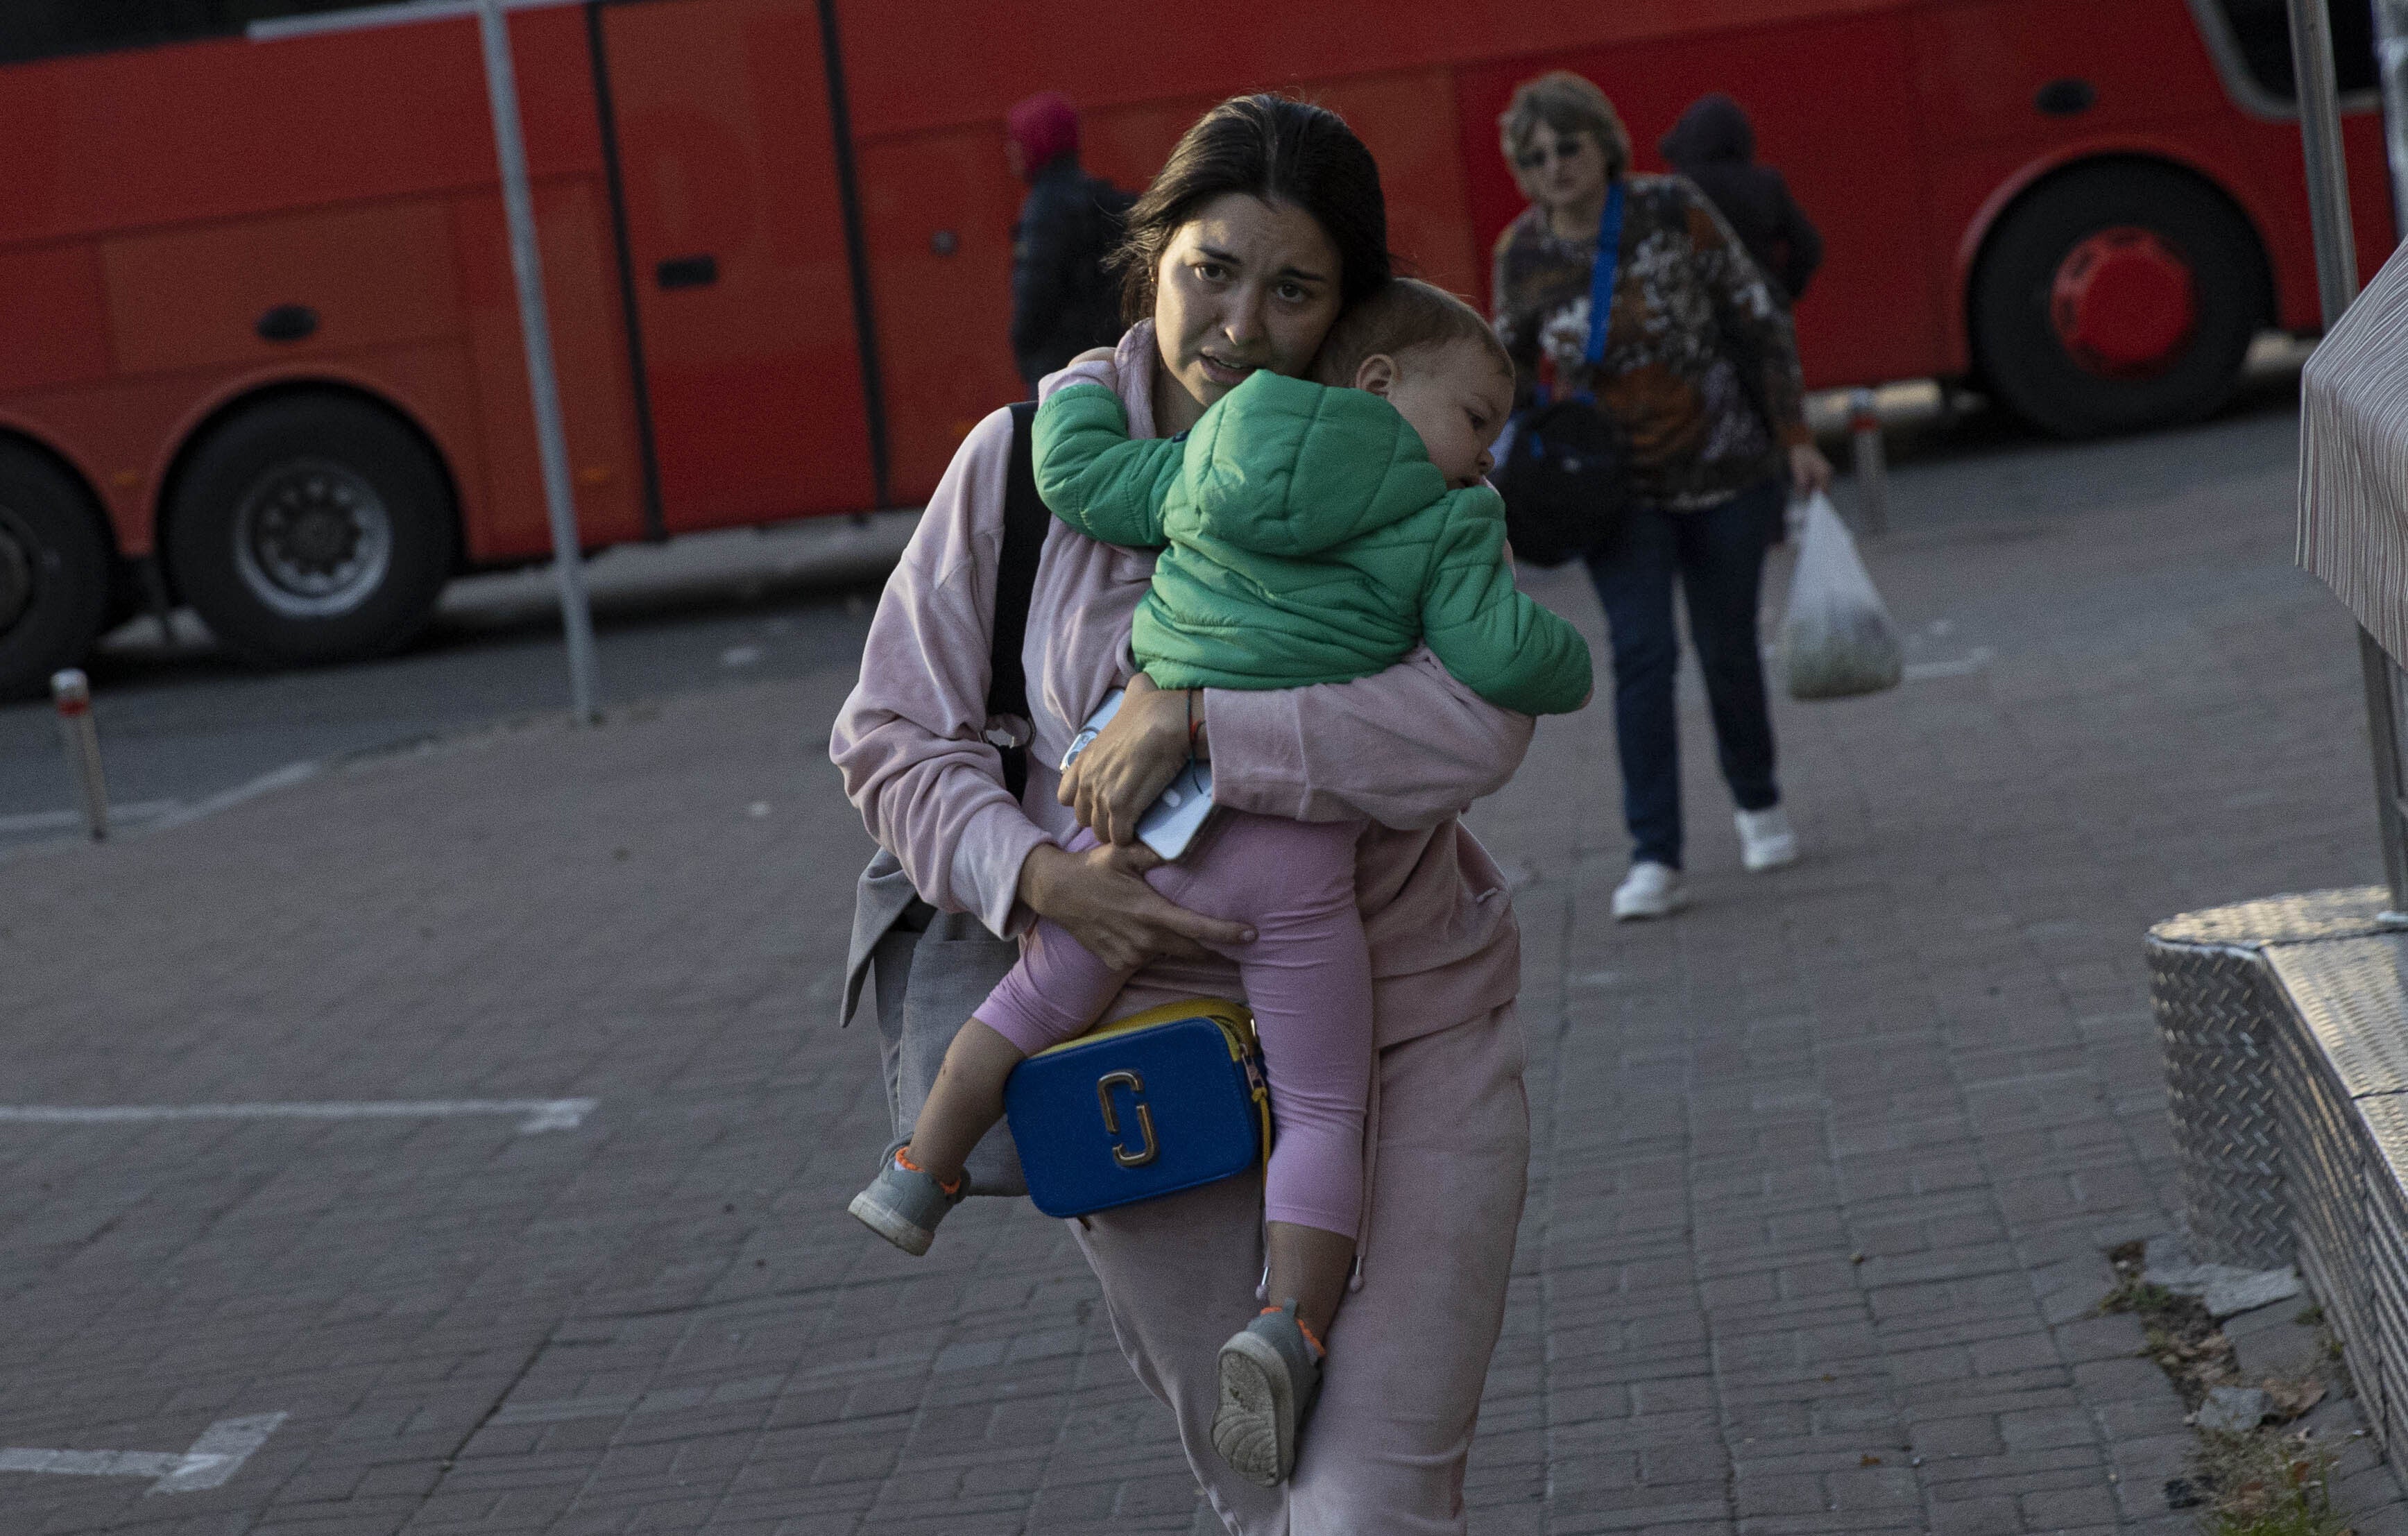 A Ukrainian woman is seen with her child after the Russian attacks in Kyiv, Ukraine on October 17, 2022.  (Photo: Metin Aktas/Anadolu Agency, Getty Images)